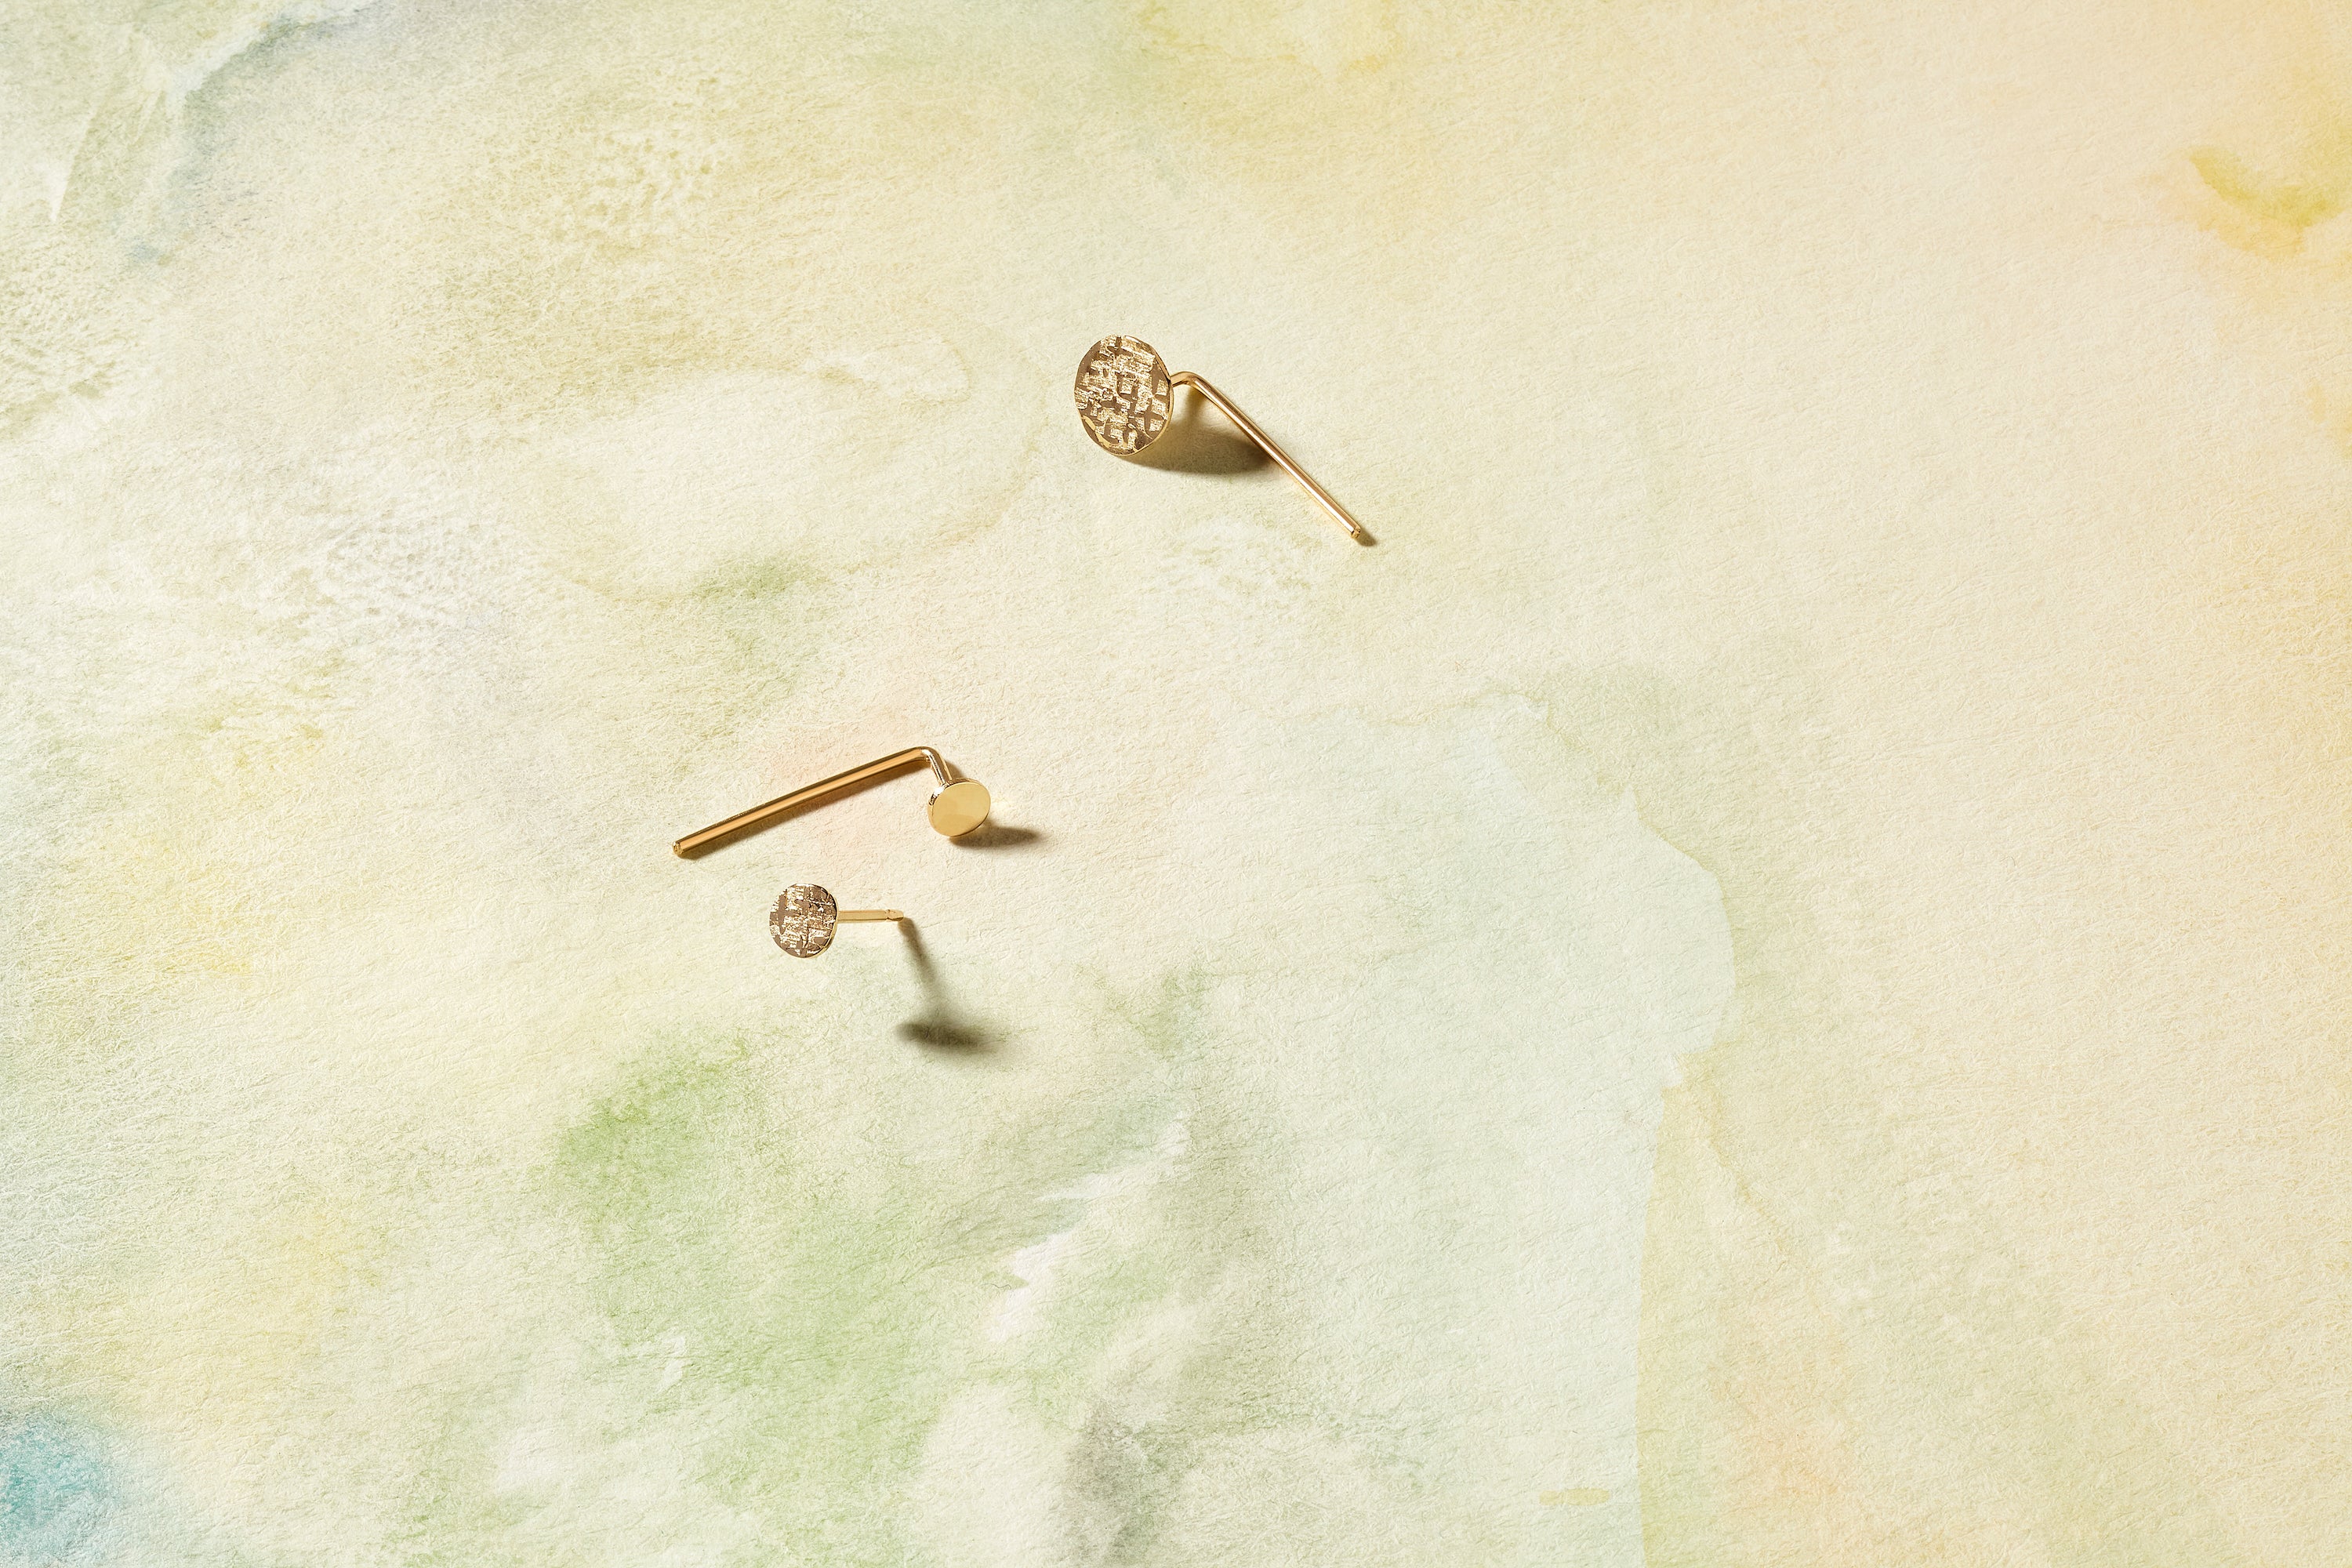 The Dot Hook, modern simplicity in 14k gold with your choice of classic hammered textured or nugget texture